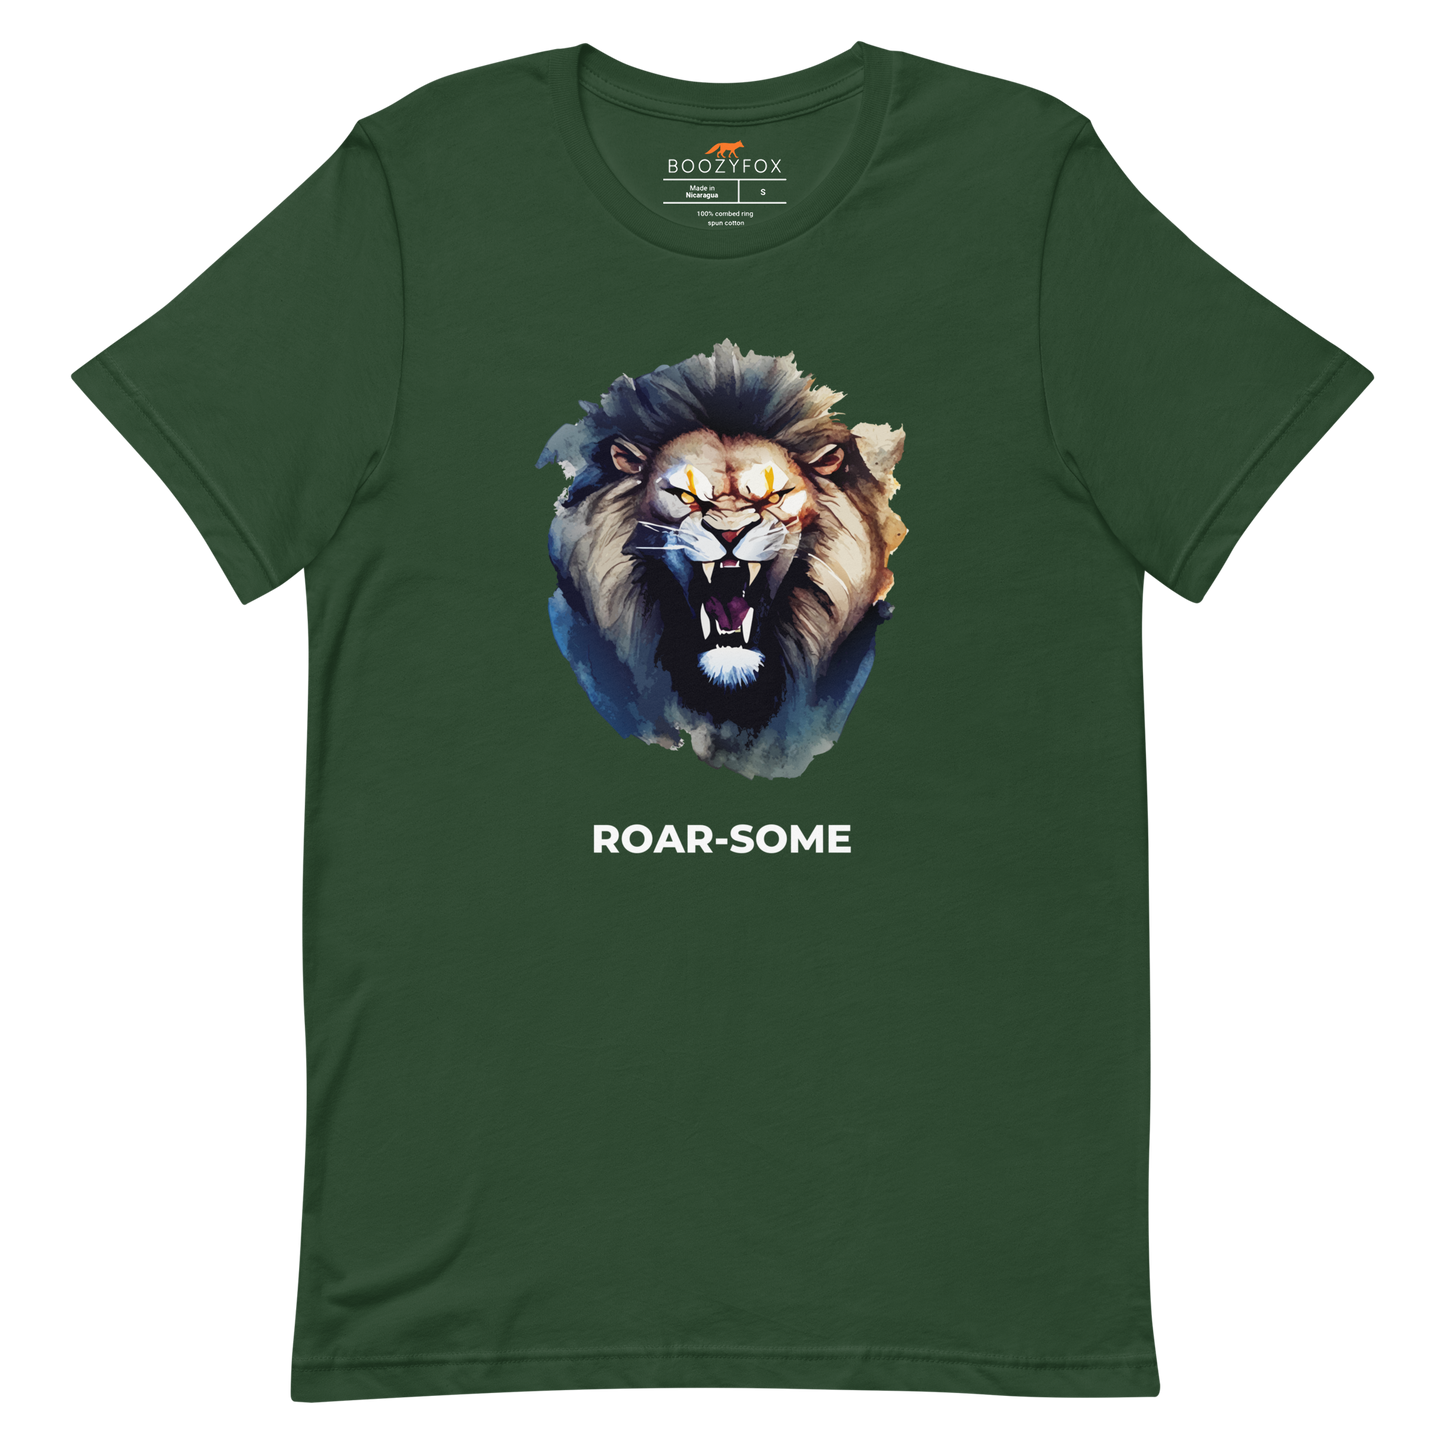 Forest Green Premium Lion Tee featuring a Roar-Some graphic on the chest - Cool Graphic Lion Tees - Boozy Fox